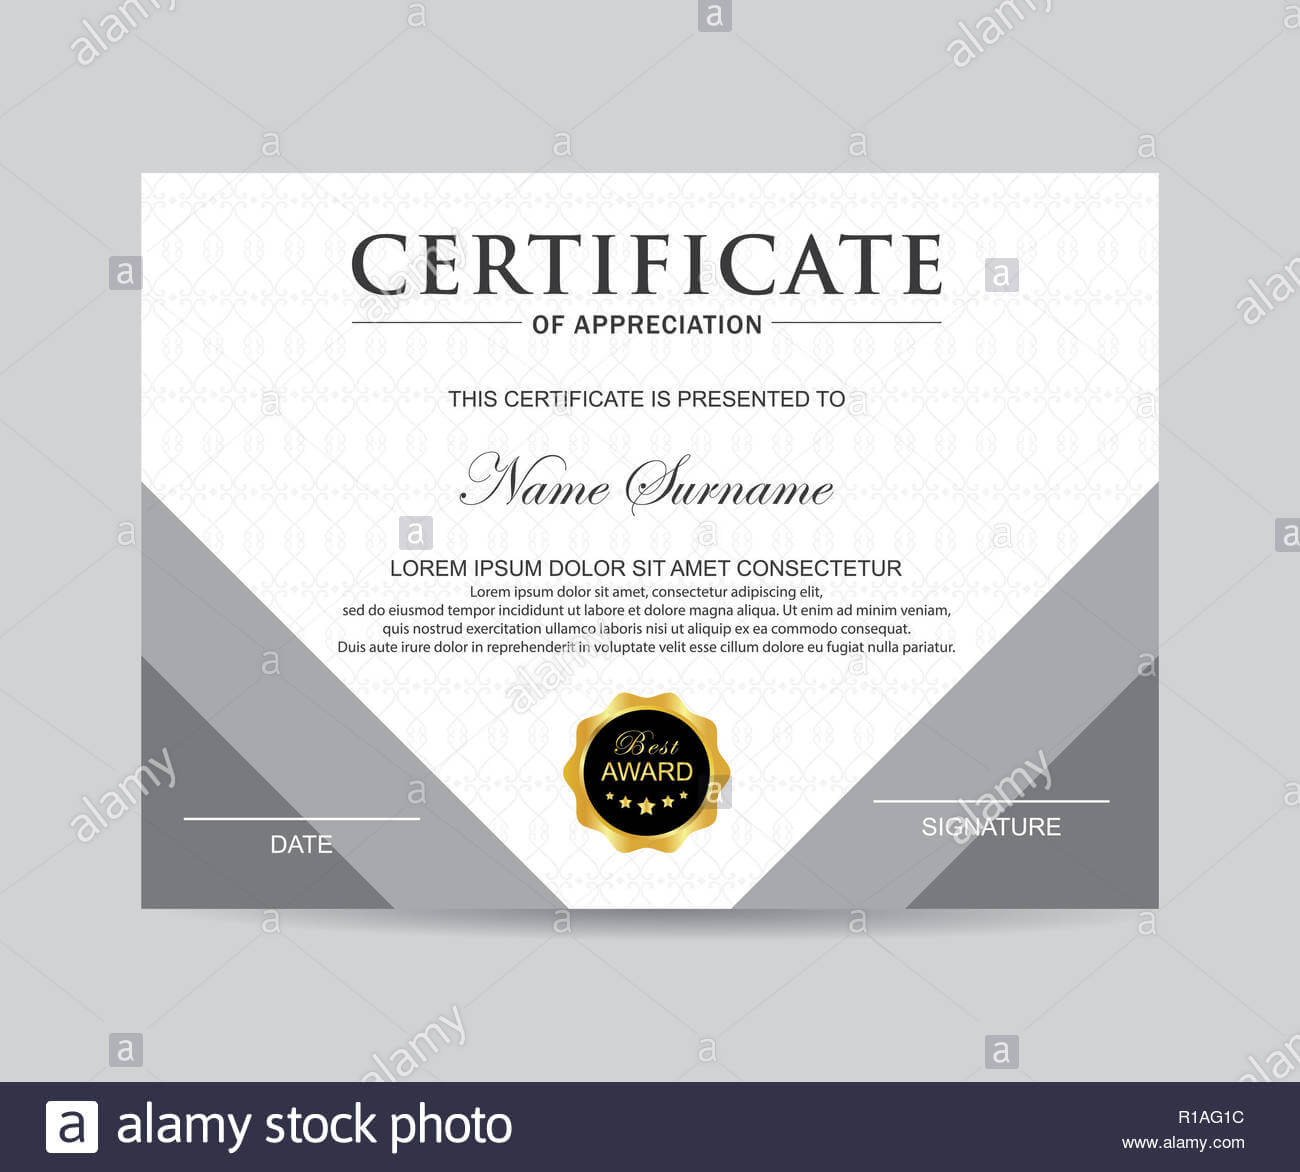 Modern Certificate Template And Background Stock Photo With Regard To Borderless Certificate Templates